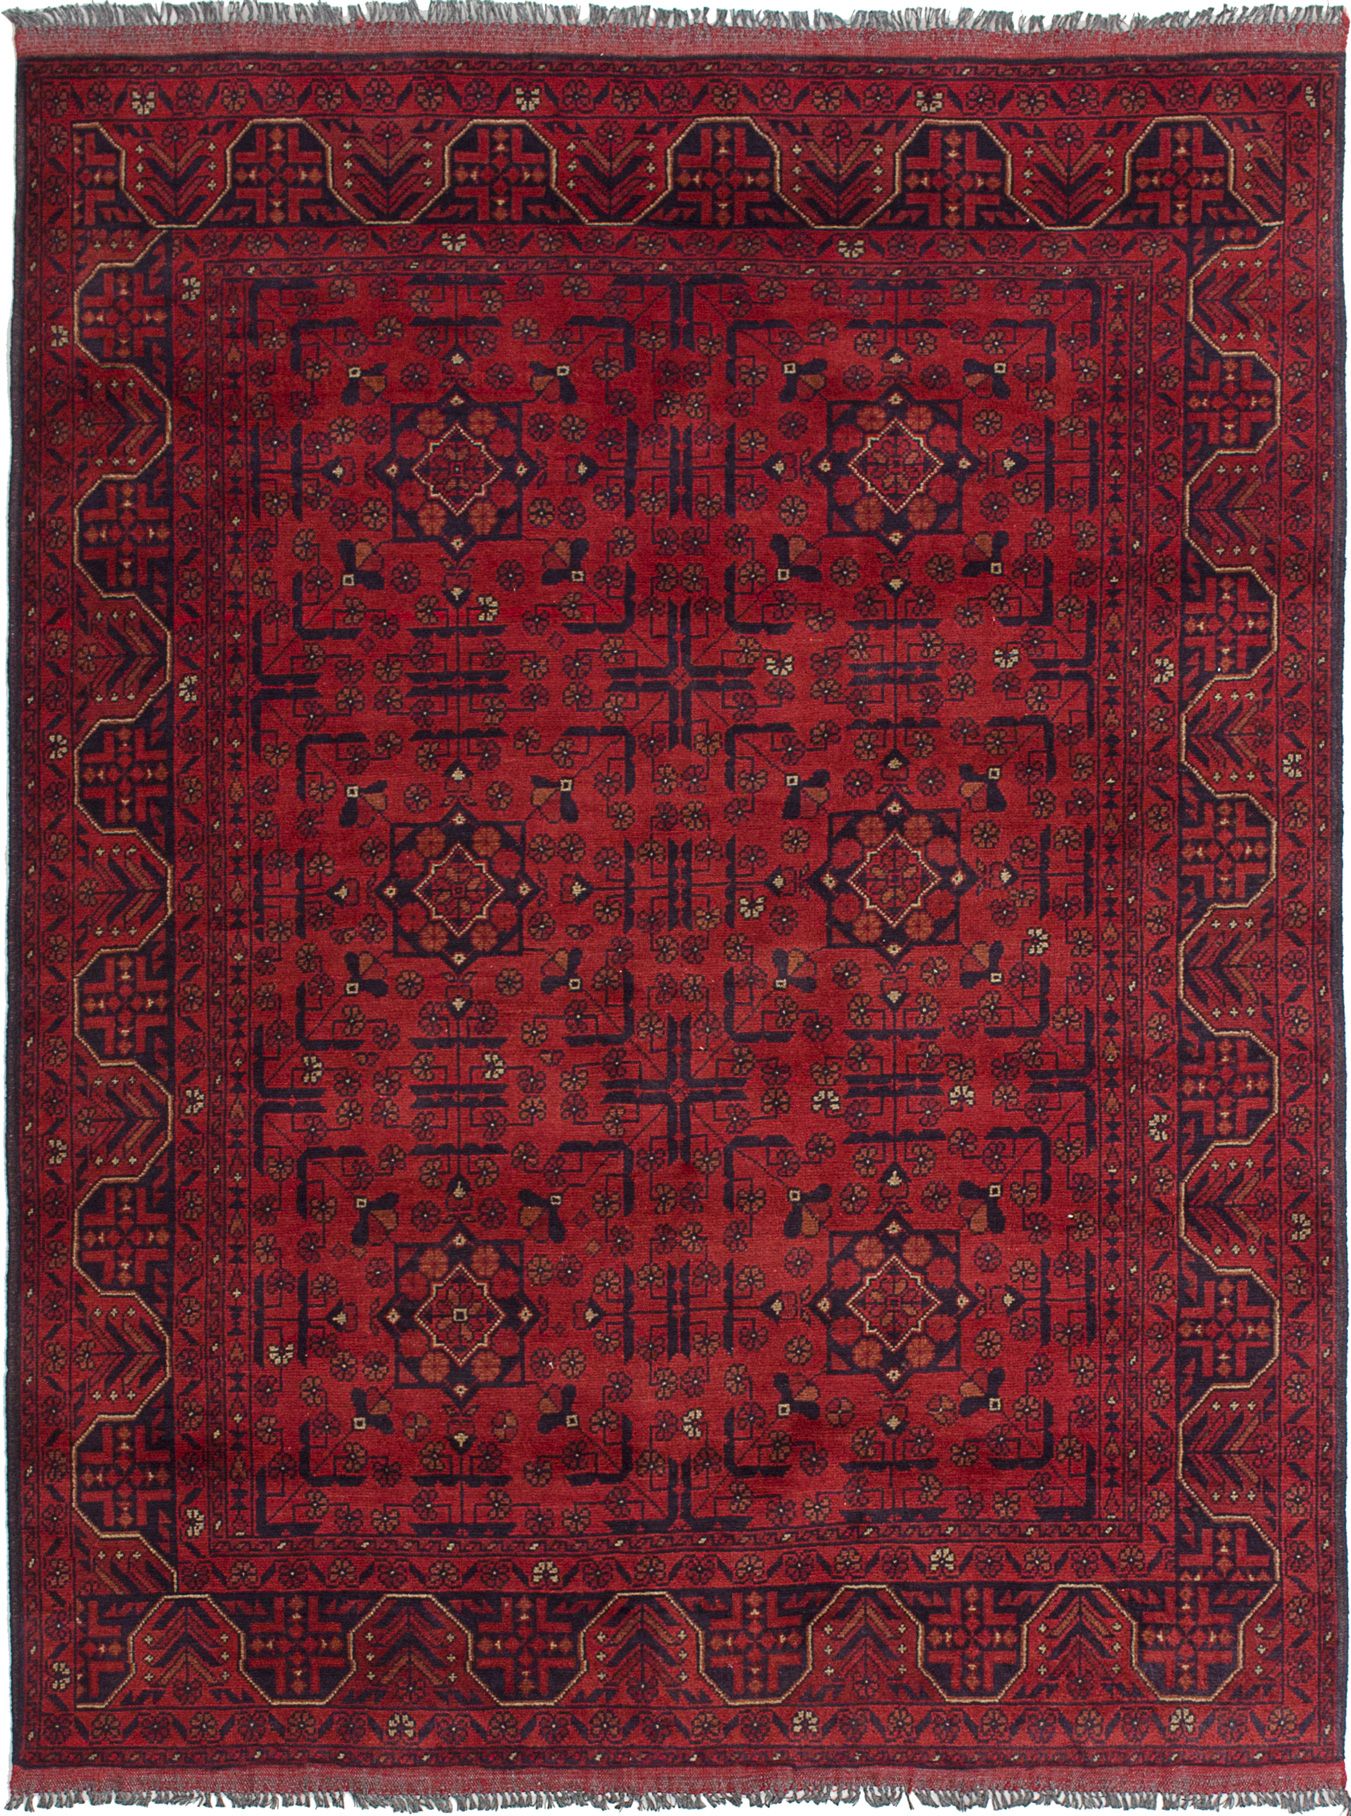 Hand-knotted Finest Khal Mohammadi Red Wool Rug 4'10" x 6'6"  Size: 4'10" x 6'6"  